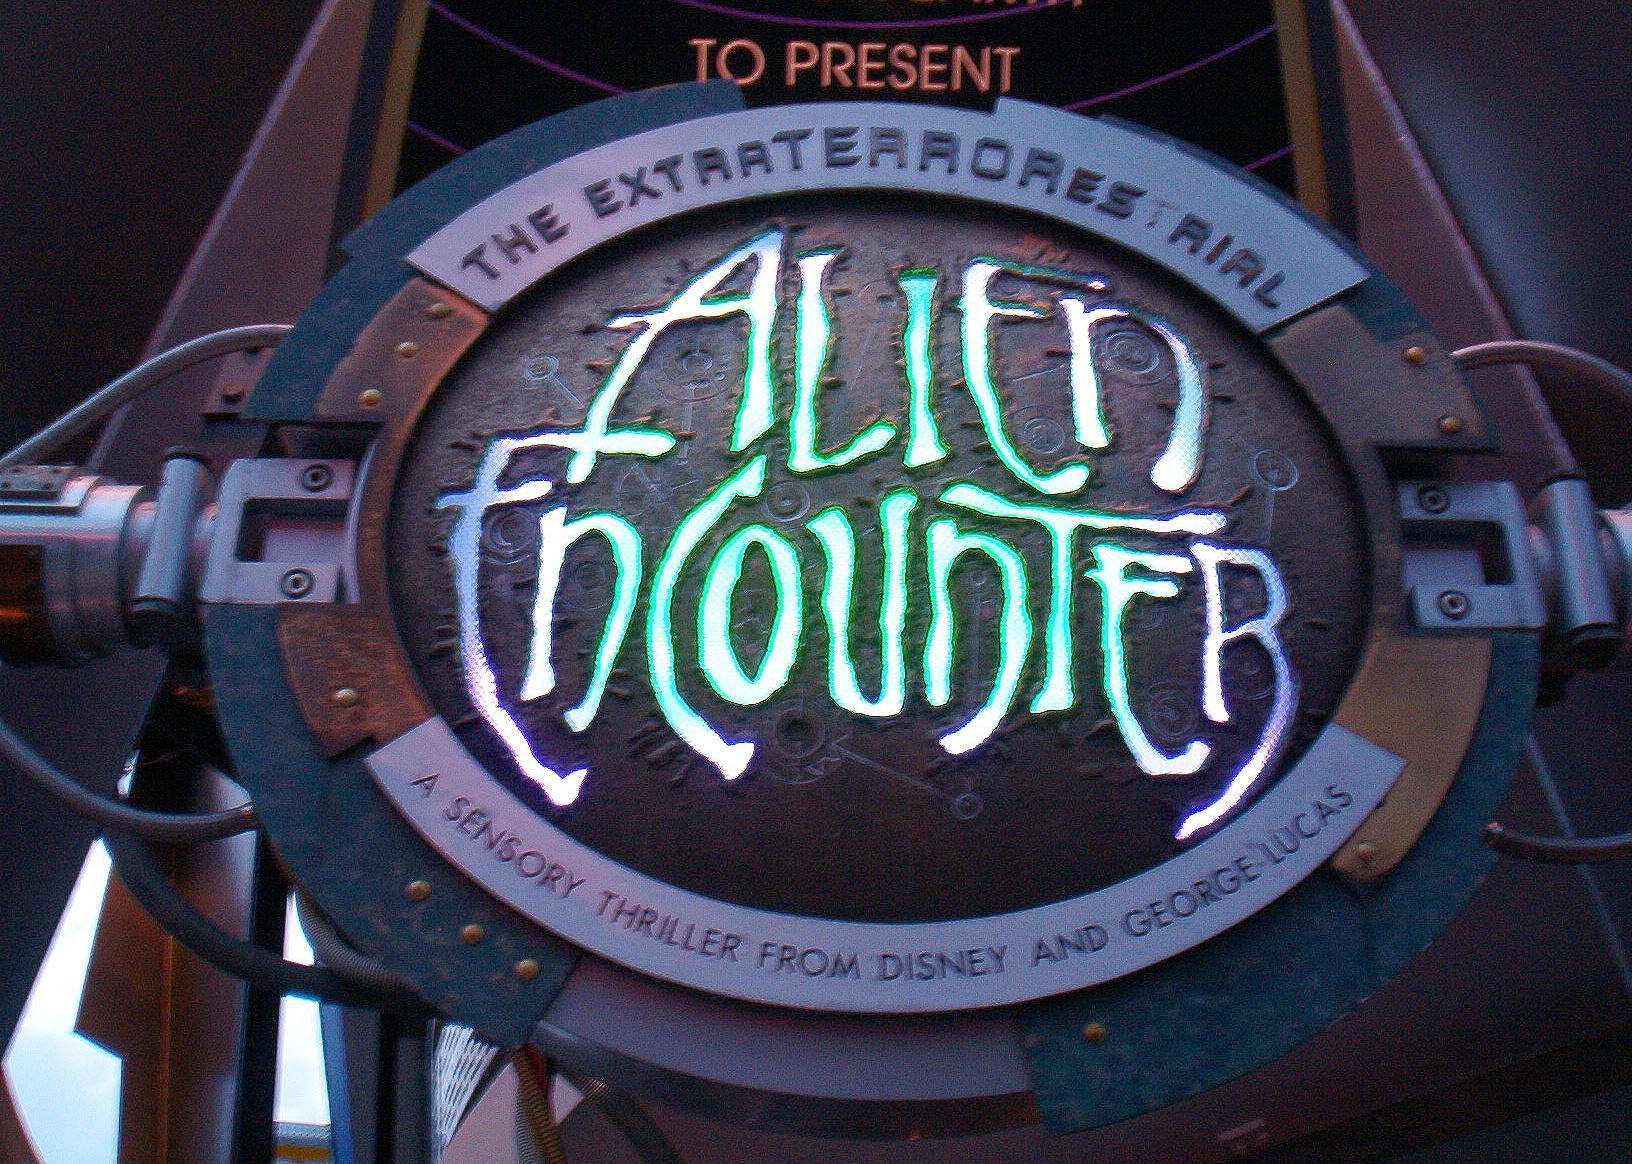 The entrance sign for ExtraTERRORestrial Alien Encounter